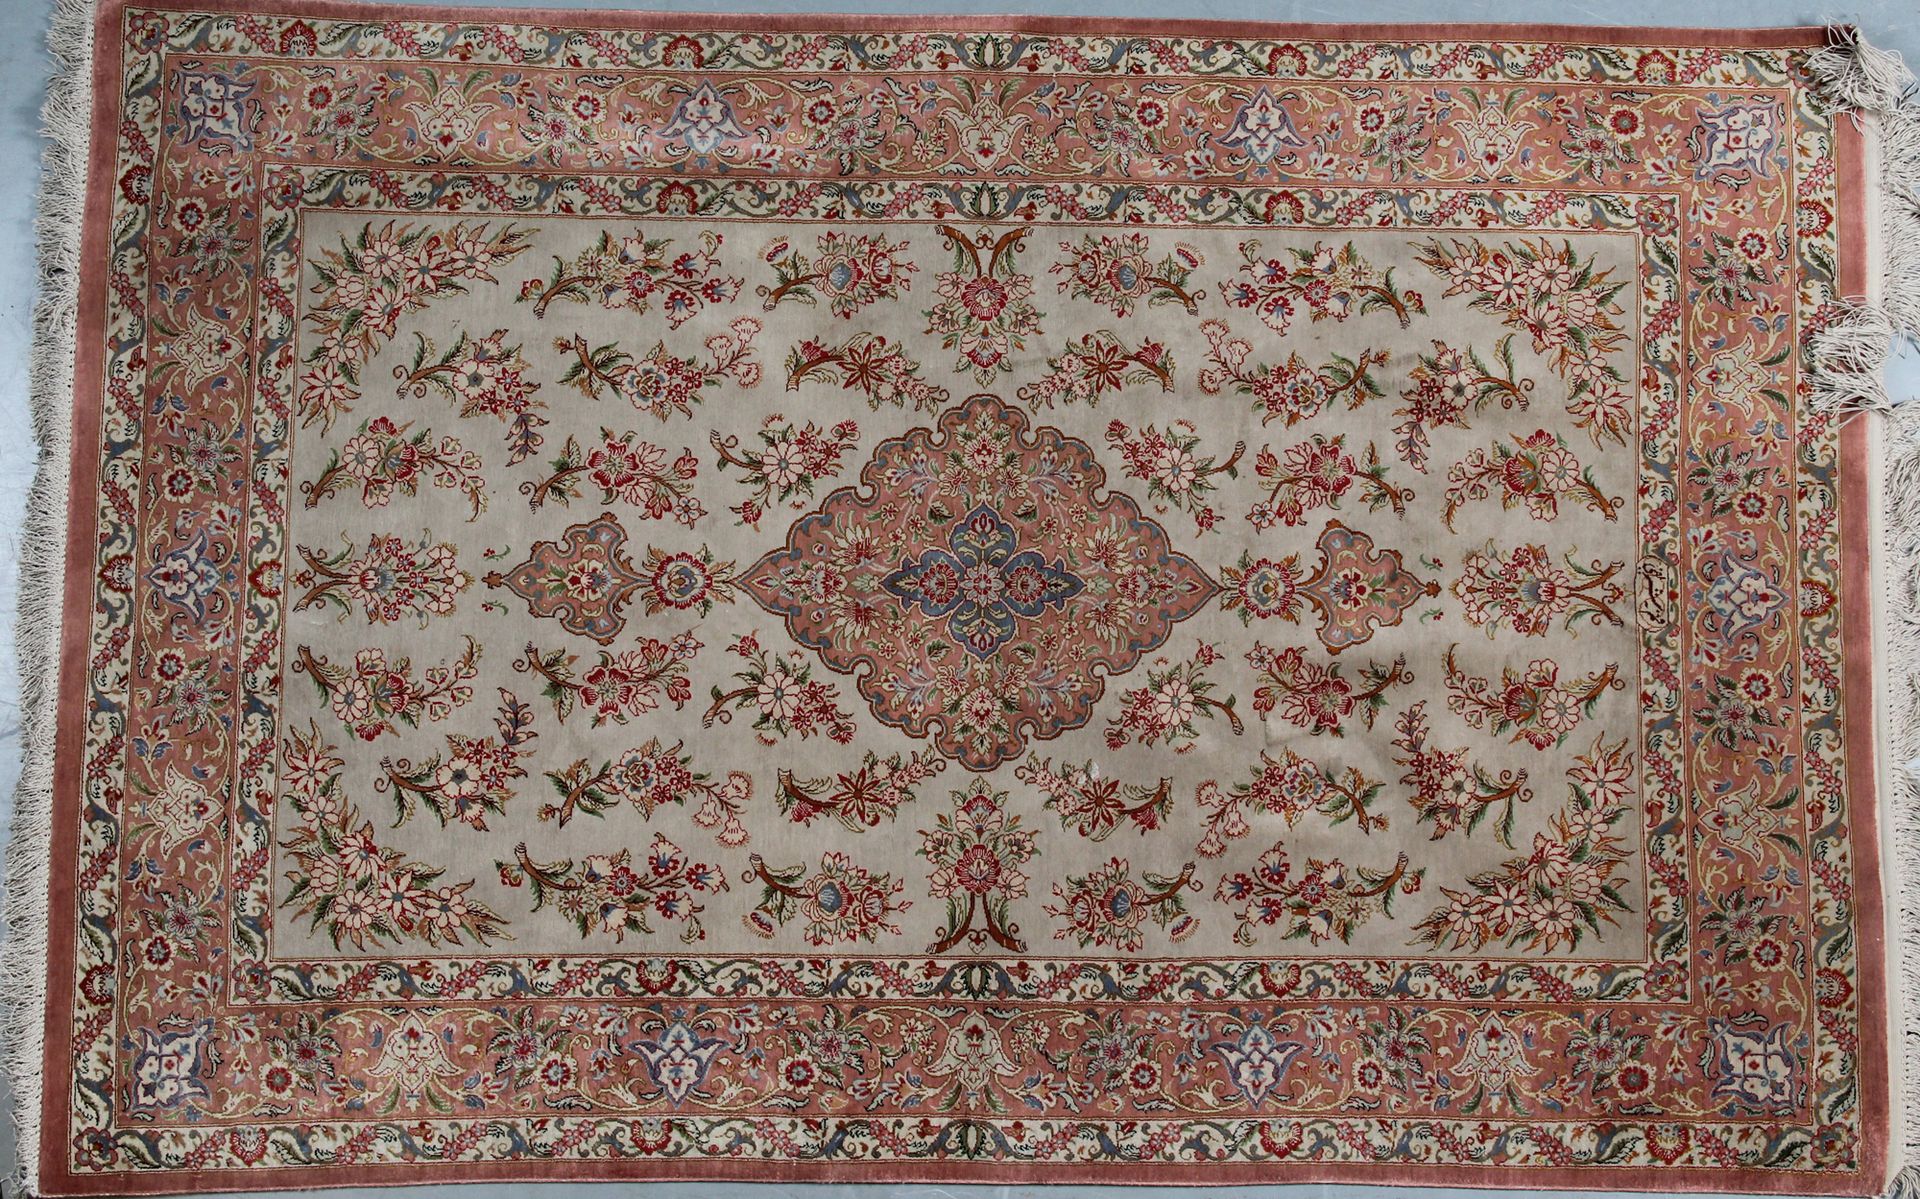 Null FINE SILK GHOUM RUG (Iran circa 1975-1970)

Pearl-gray field decorated with&hellip;